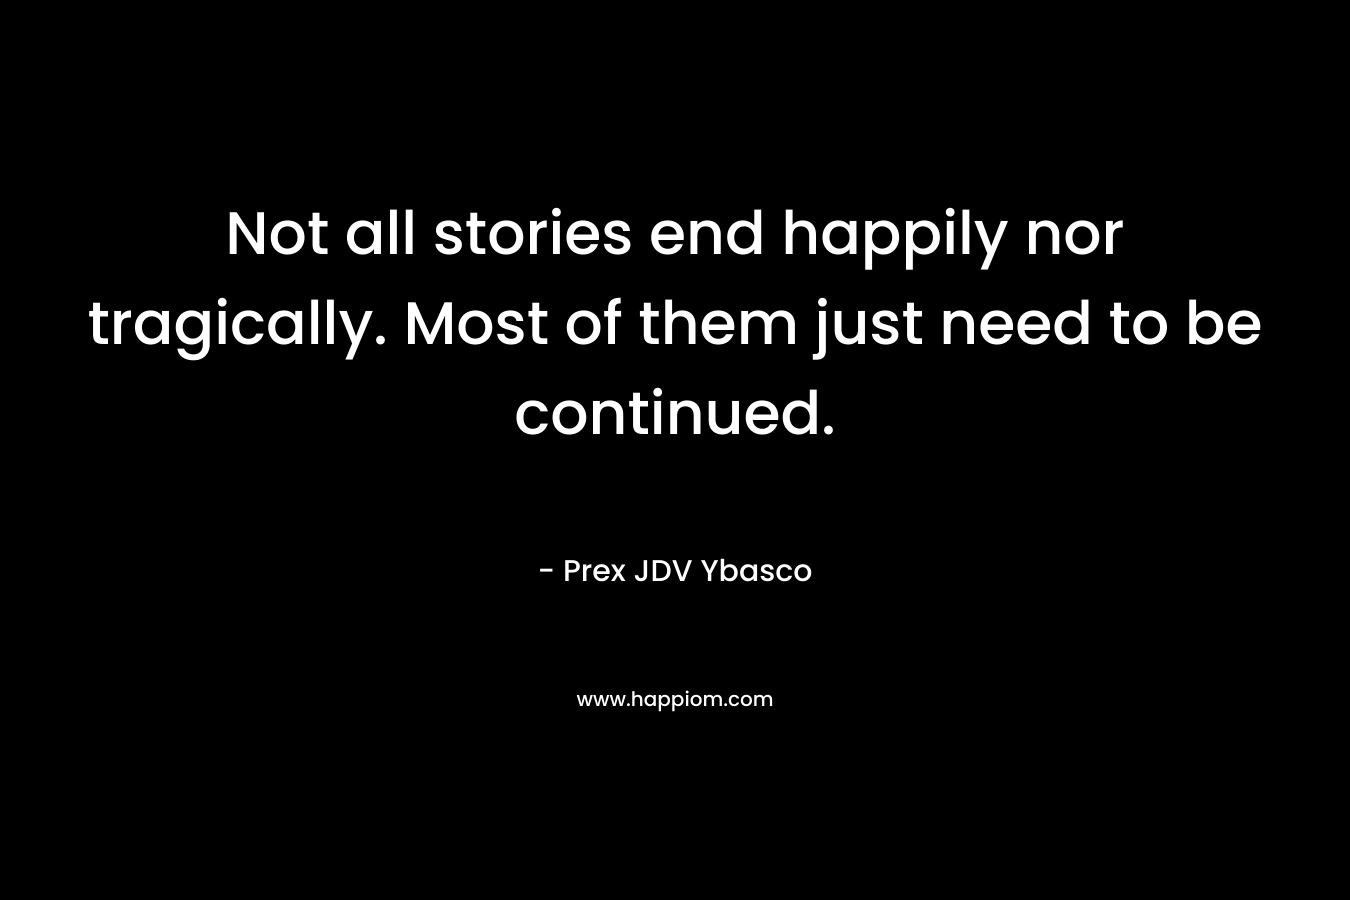 Not all stories end happily nor tragically. Most of them just need to be continued. – Prex JDV Ybasco